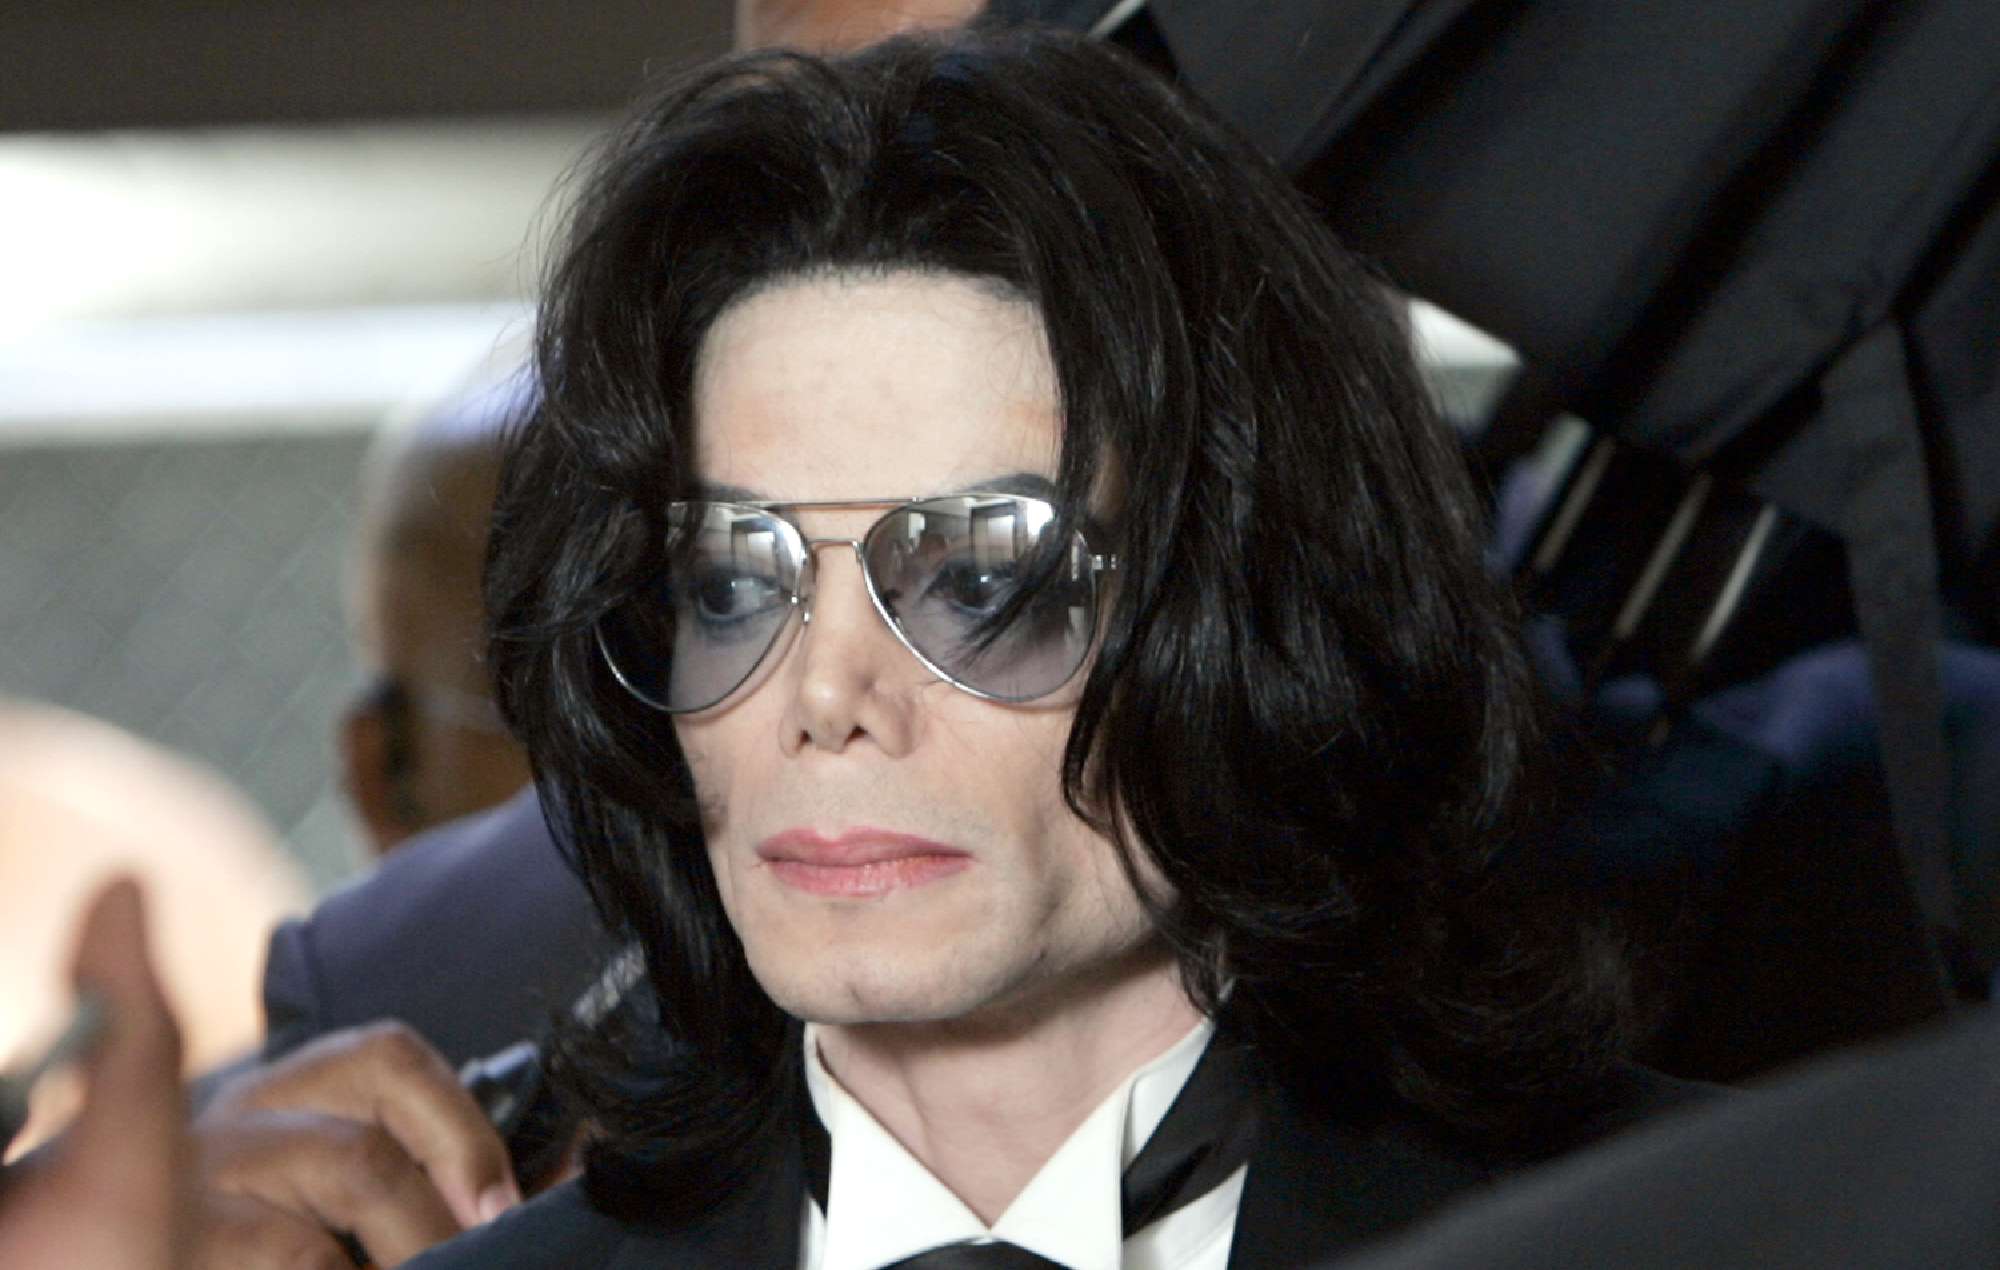 Michael Jackson sexual abuse lawsuits revived by US appeals court